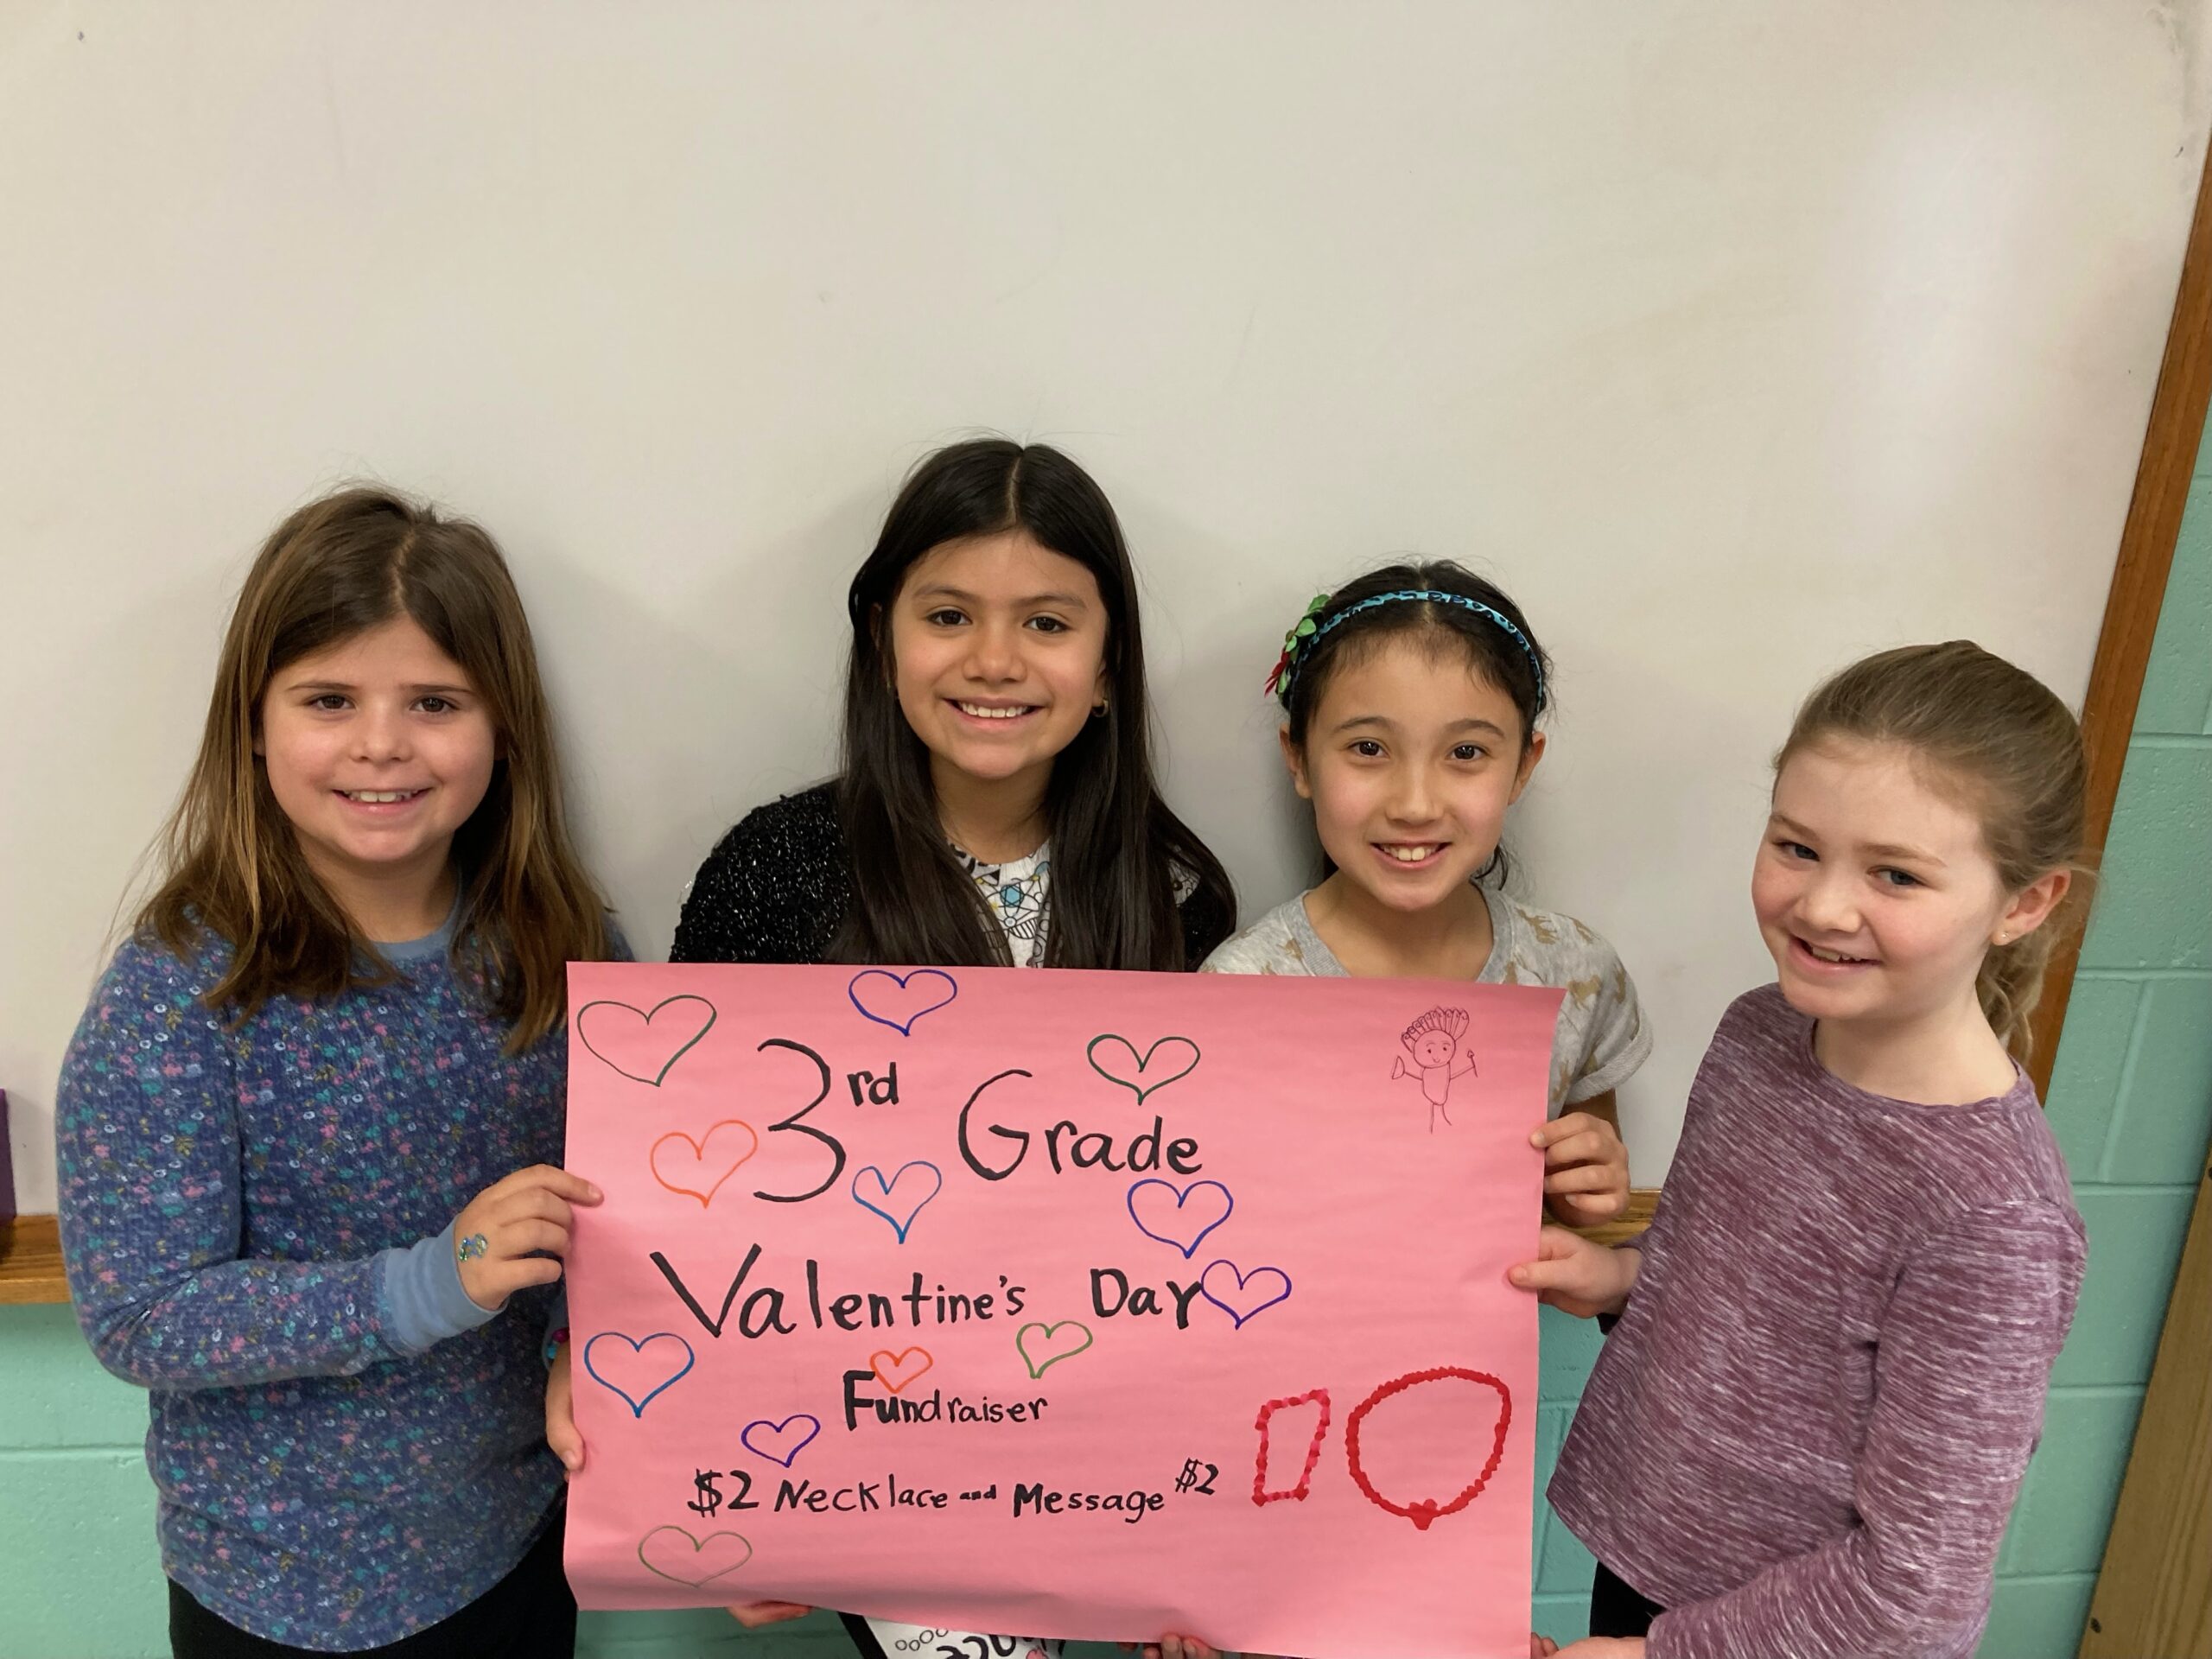 Hampton Bays Elementary School third grade students recently raised money toward their upcoming field trip to the Vanderbilt Planetarium and Museum by selling valentines. They helped promote the fundraiser by making signs, and parent volunteers assisted by selling them during student lunch periods. On the
morning of Valentine's Day, the students delivered the purchased valentines to classrooms around the building. The total raised was $966. From left, Tessa Obert, Debbie
Cabrera, Vivian Rozzi and Emma Kirst, who worked on the project.